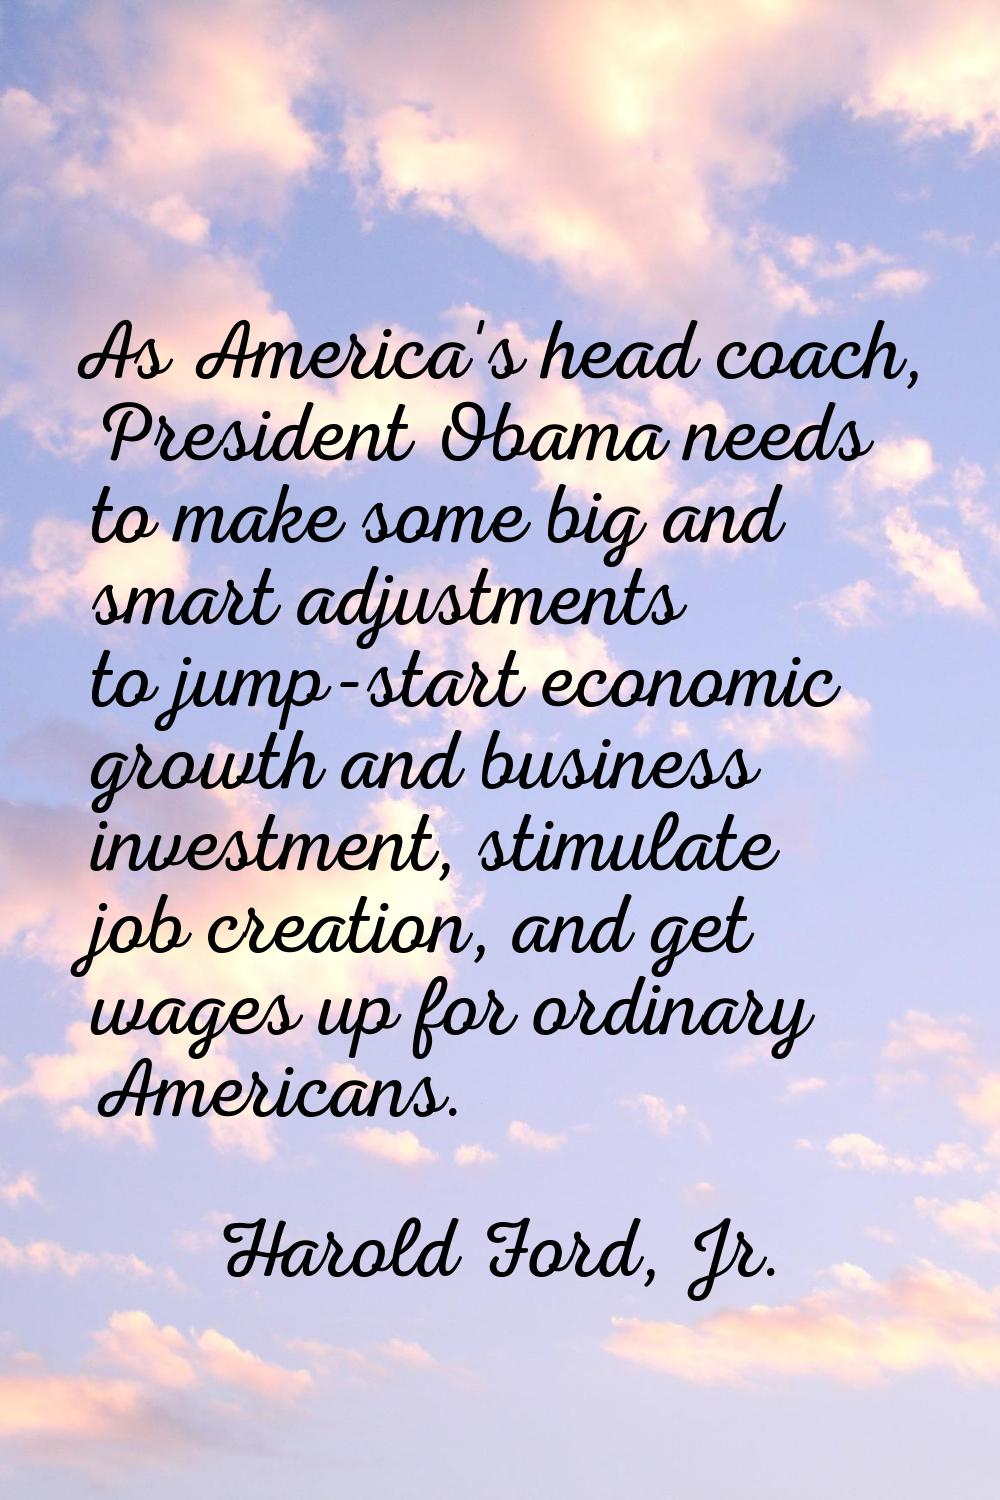 As America's head coach, President Obama needs to make some big and smart adjustments to jump-start